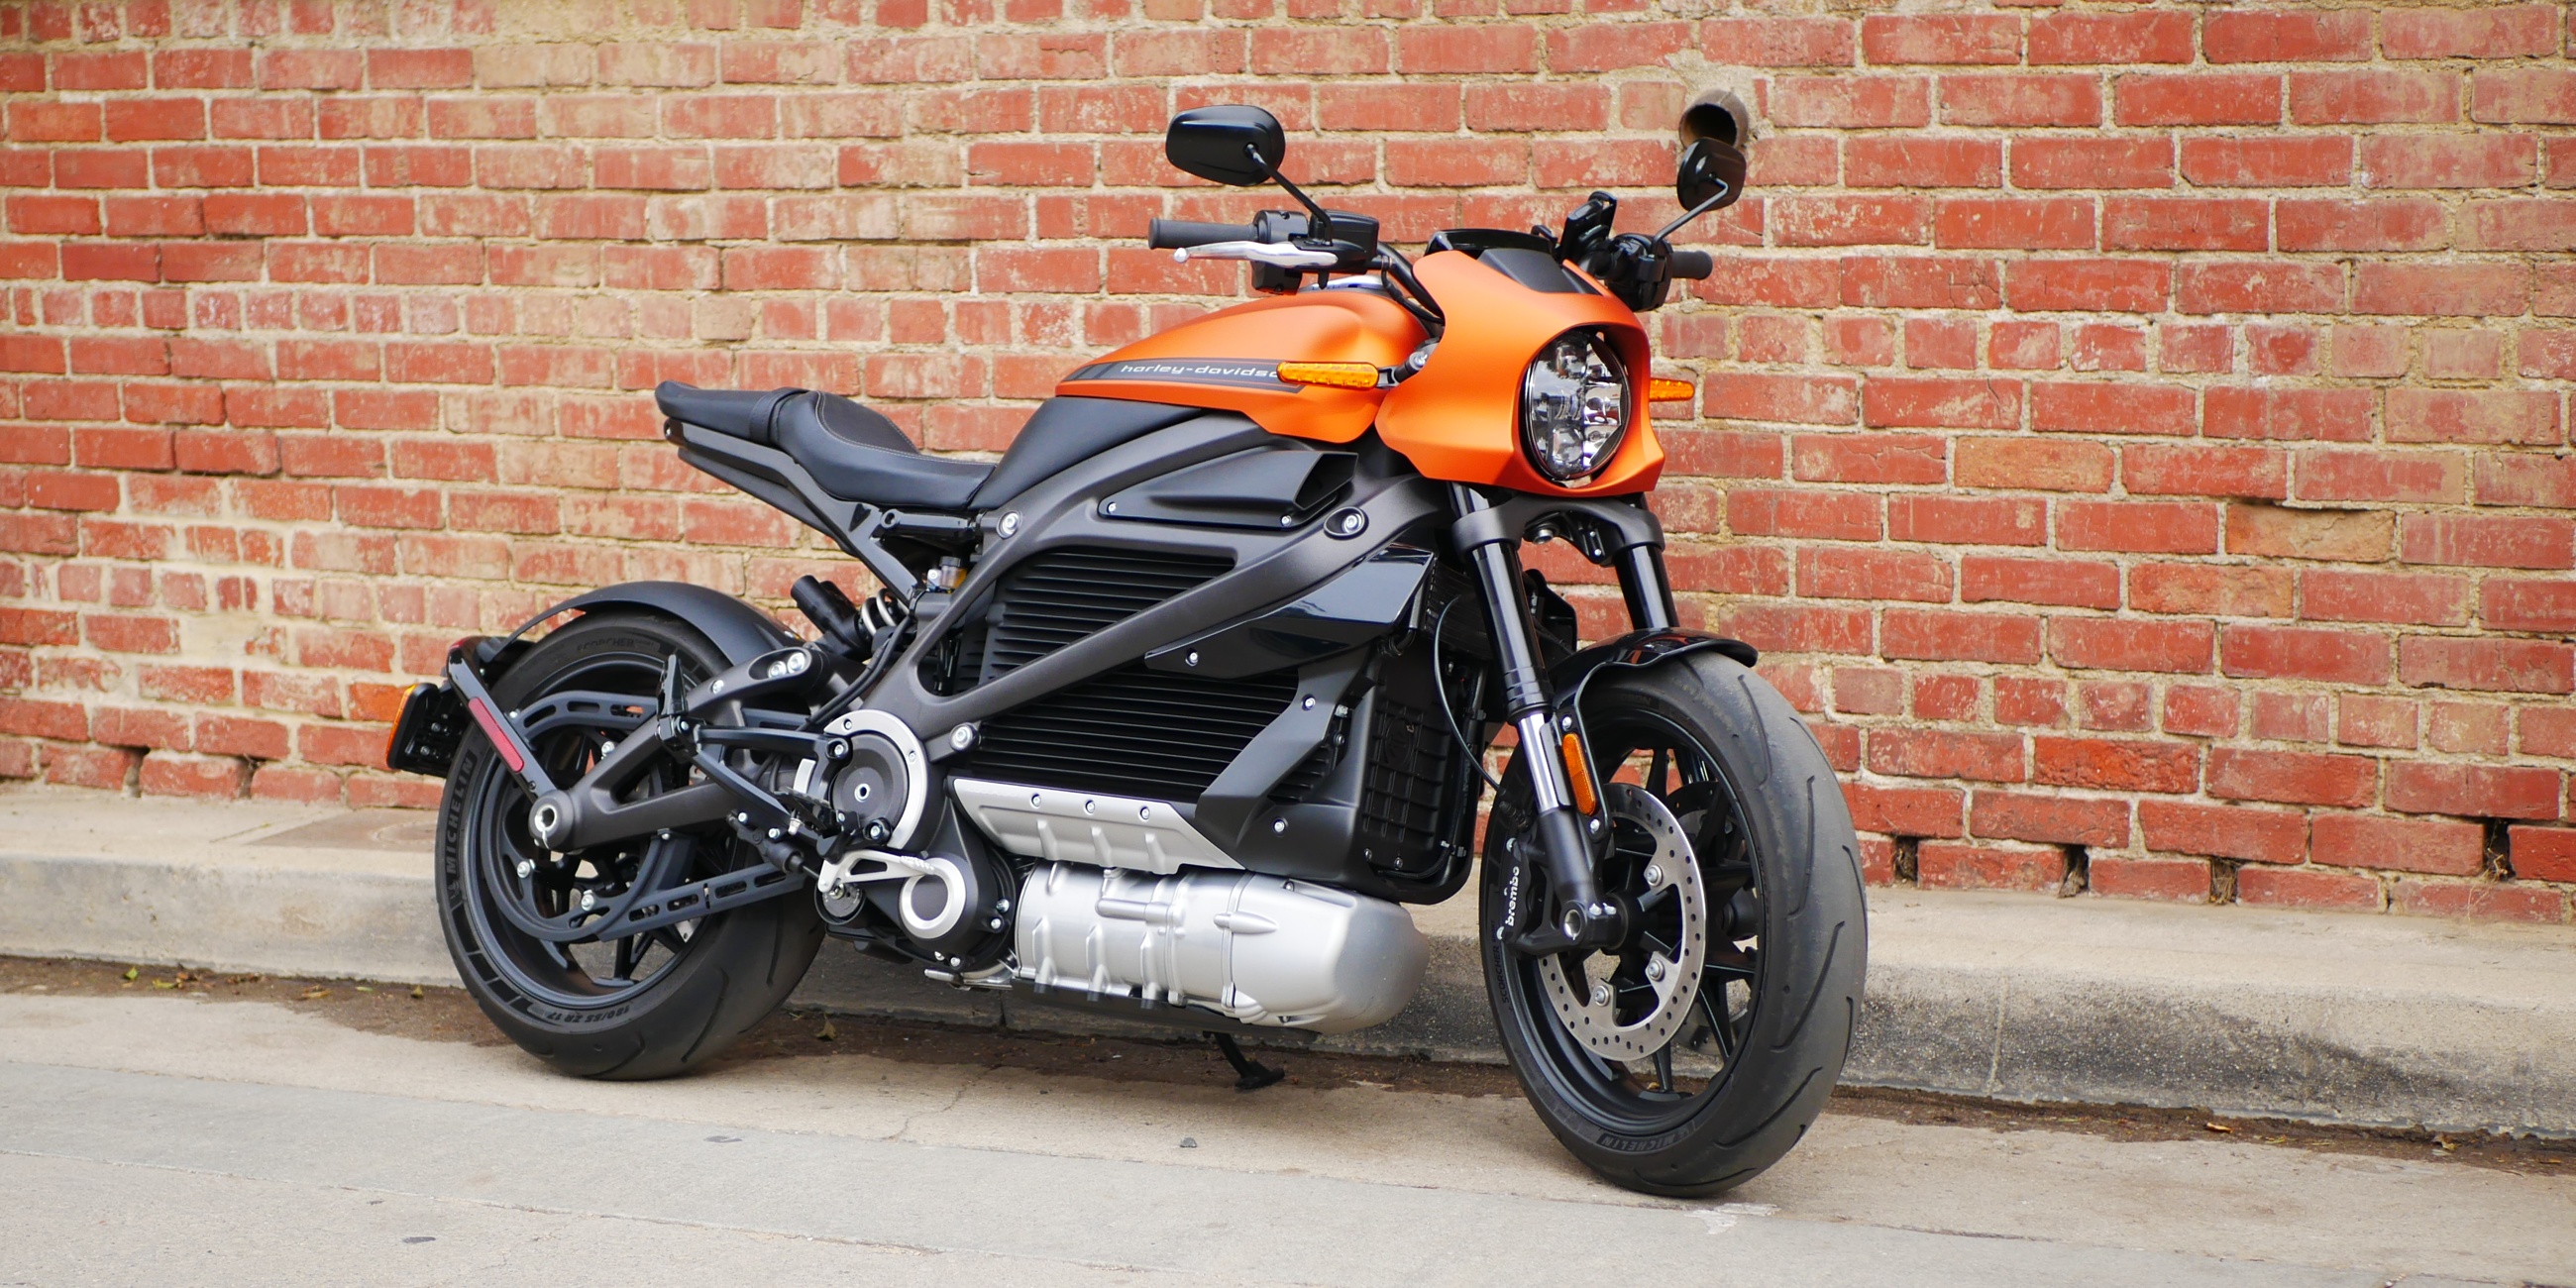 Harley-Davidson stock soars 30% this week, company recommits to electric motorcycles